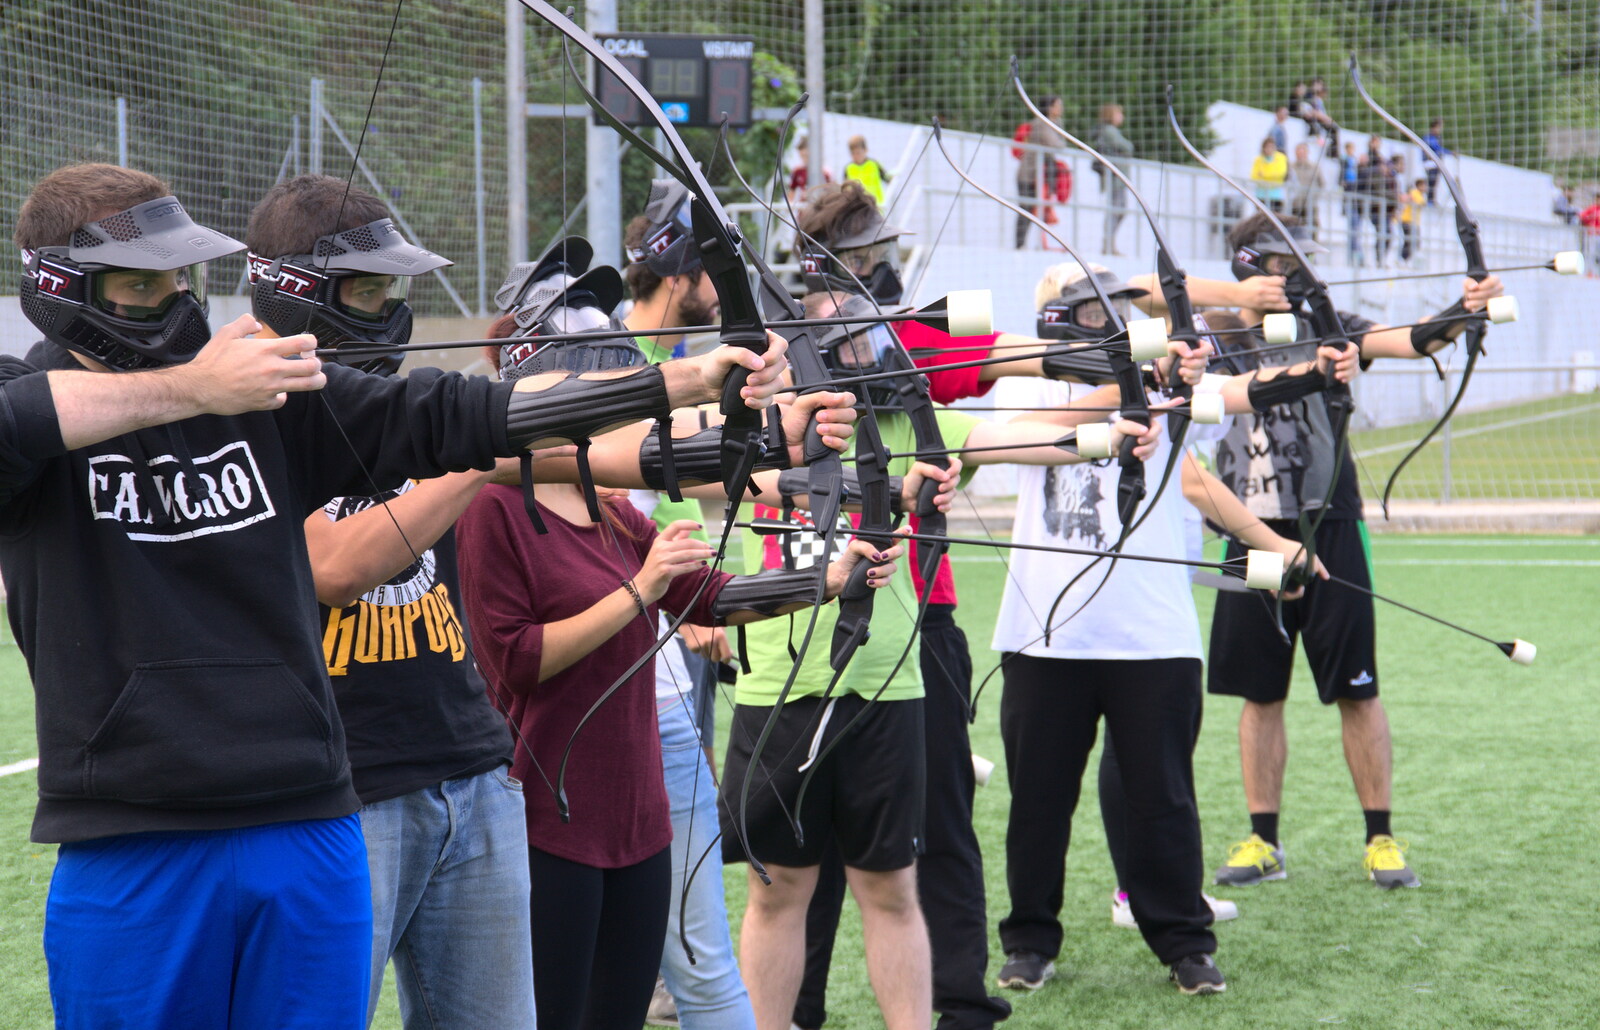 People are doing safety-plus archery from Barcelona and Parc Montjuïc, Catalonia, Spain - 21st October 2017